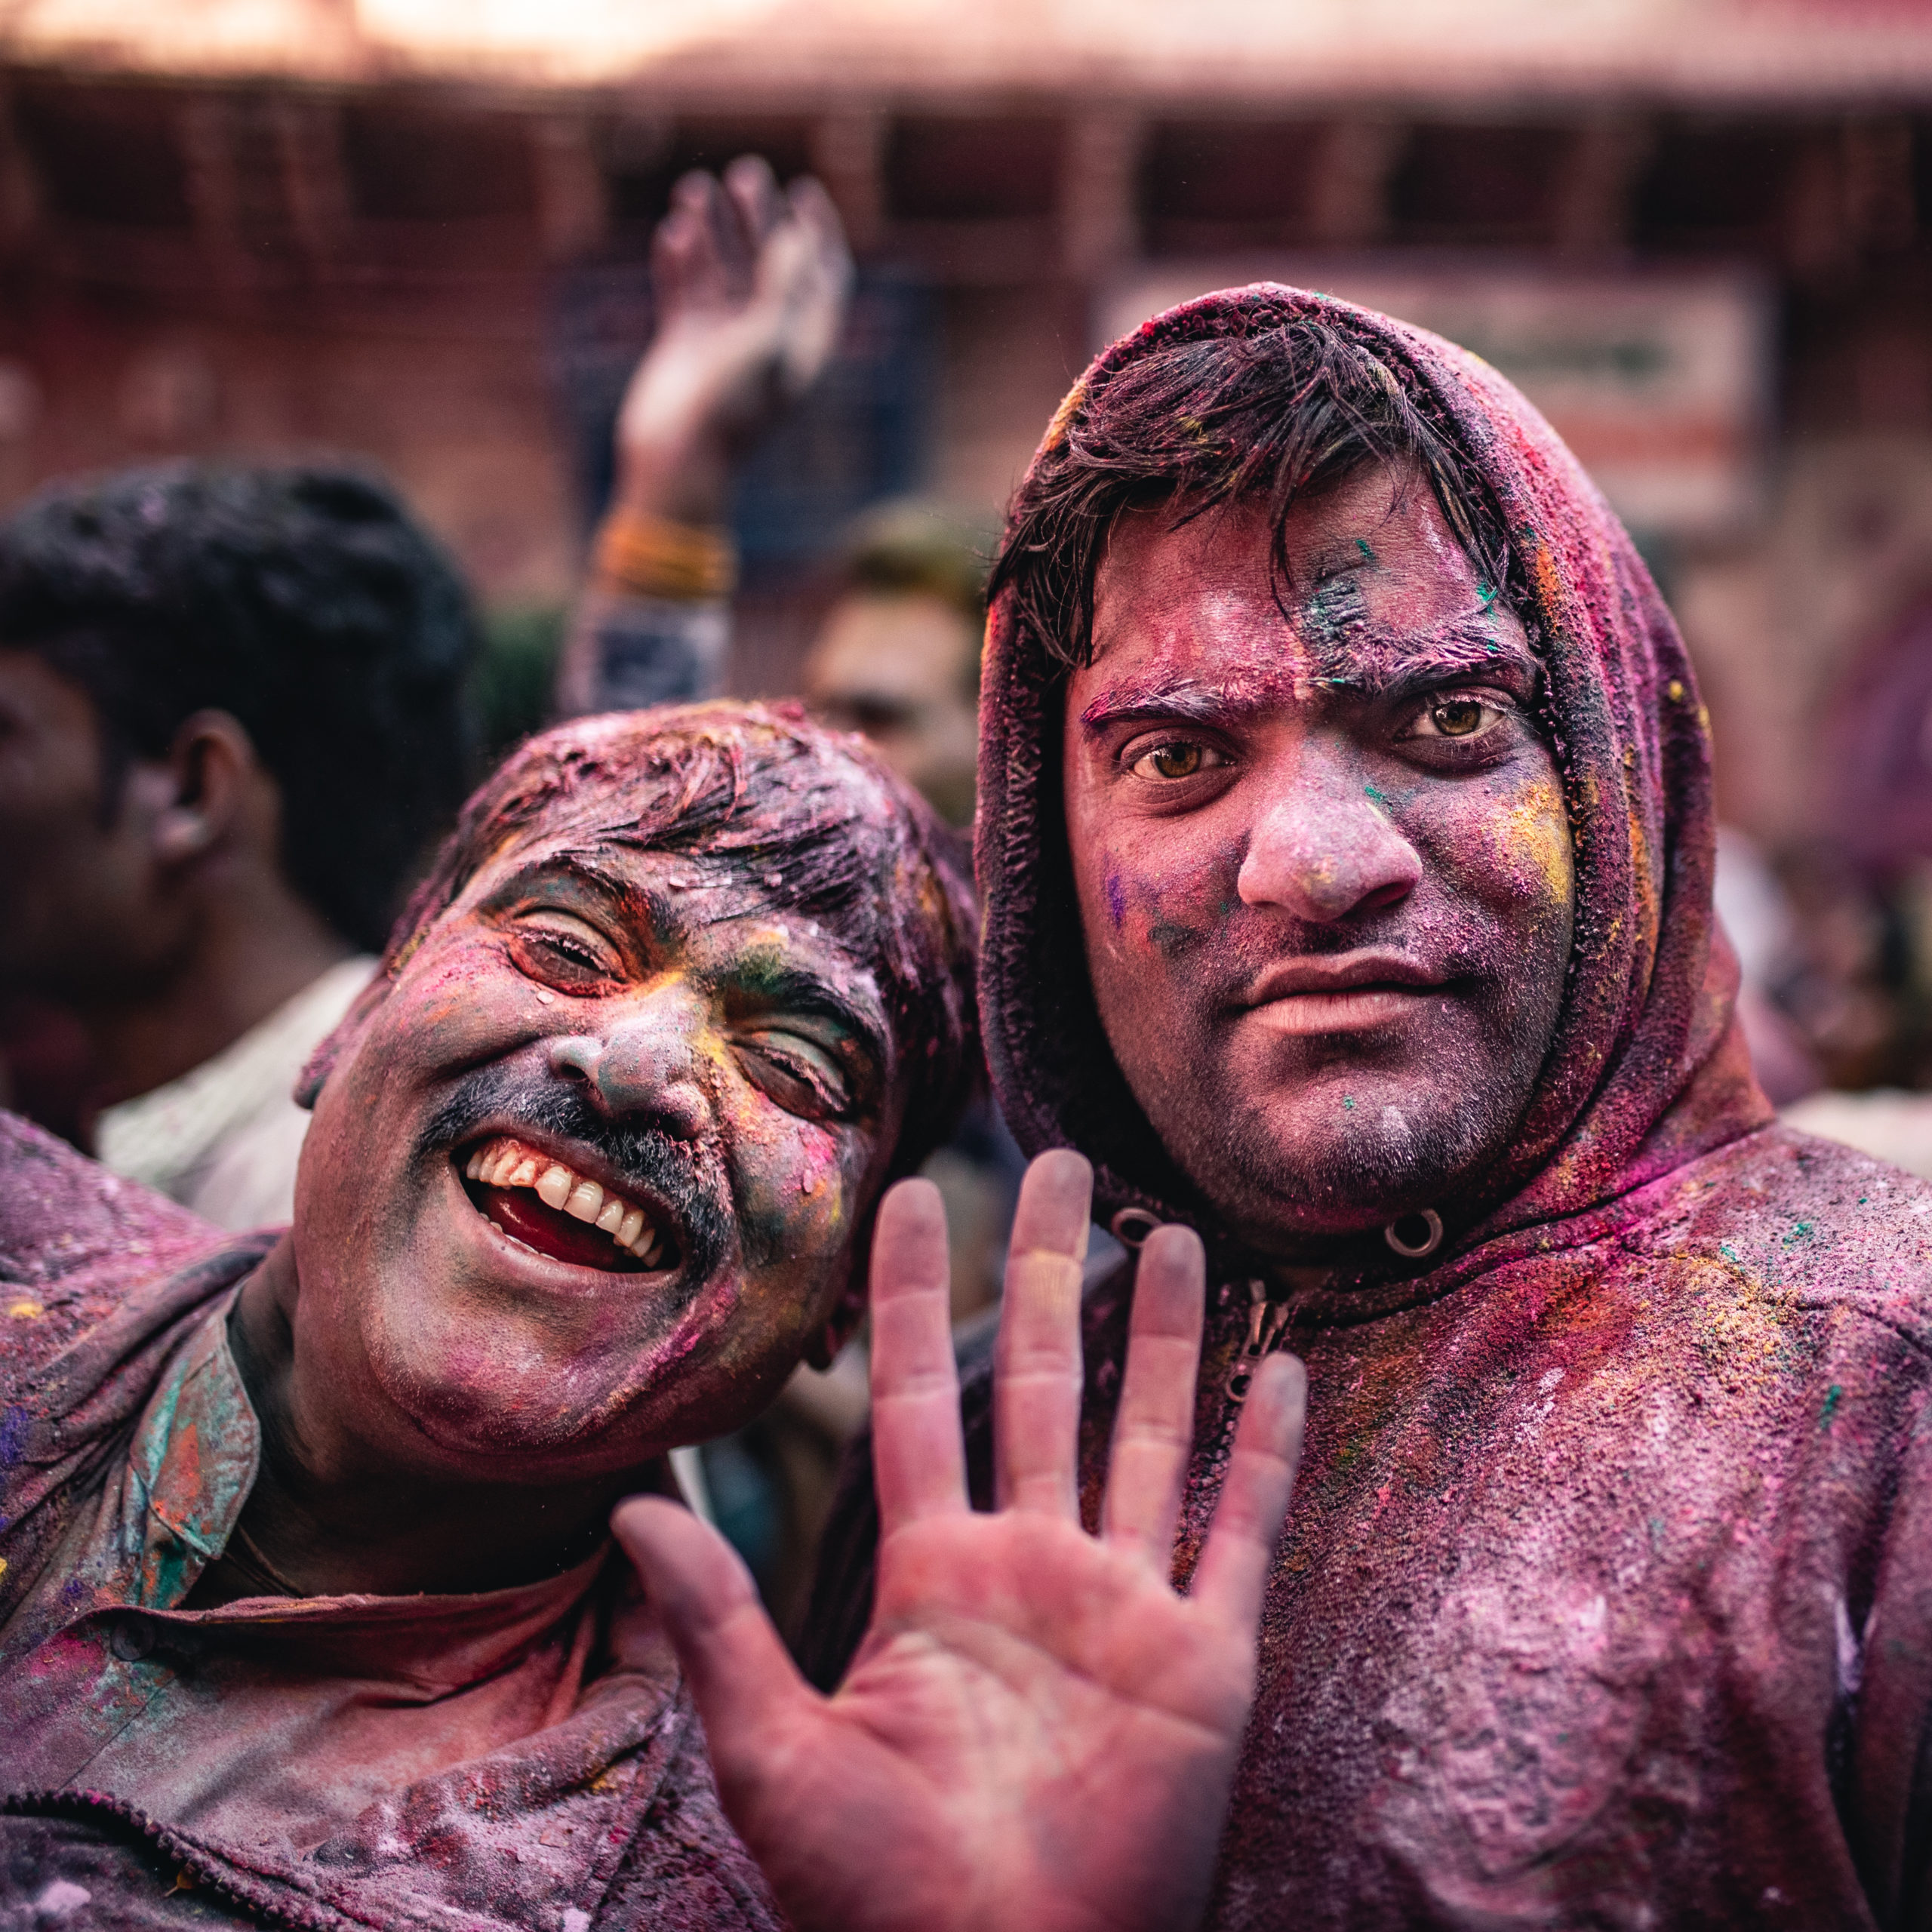 Street photography of men celebrating the Holi Festival in Vrindivan, India while covered in colorful powder